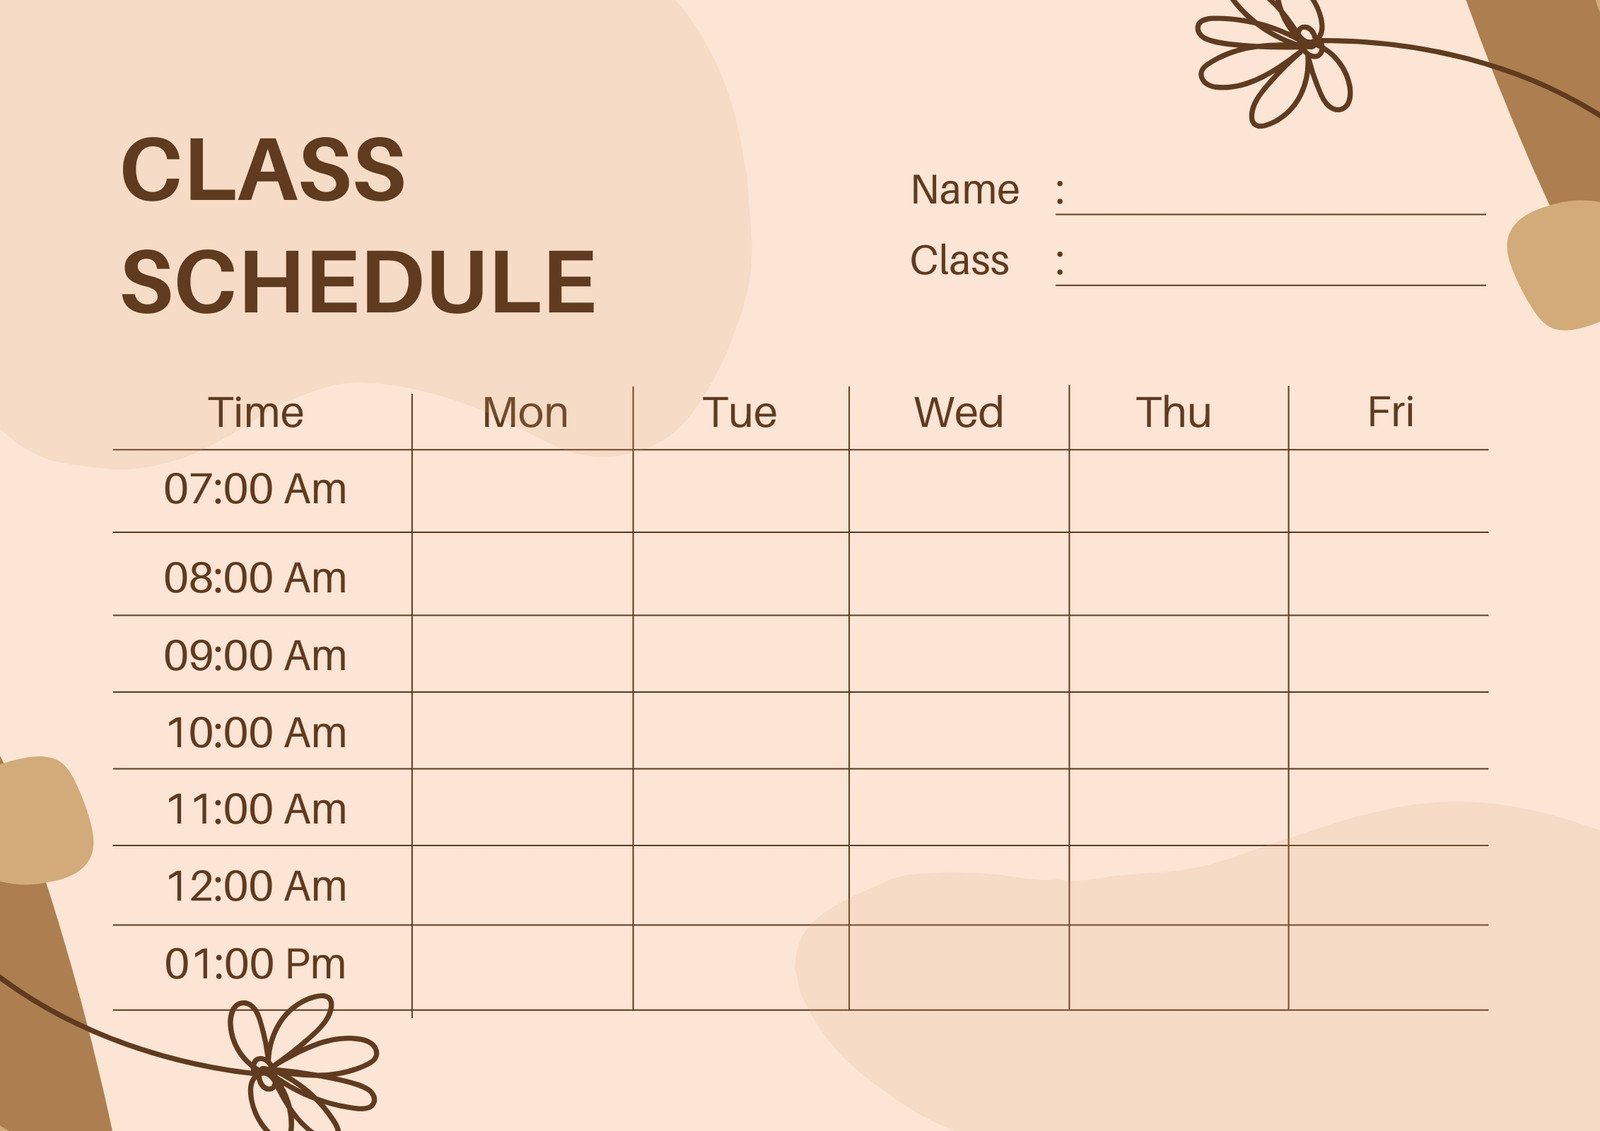 Class Schedules For Each School, Downloadable